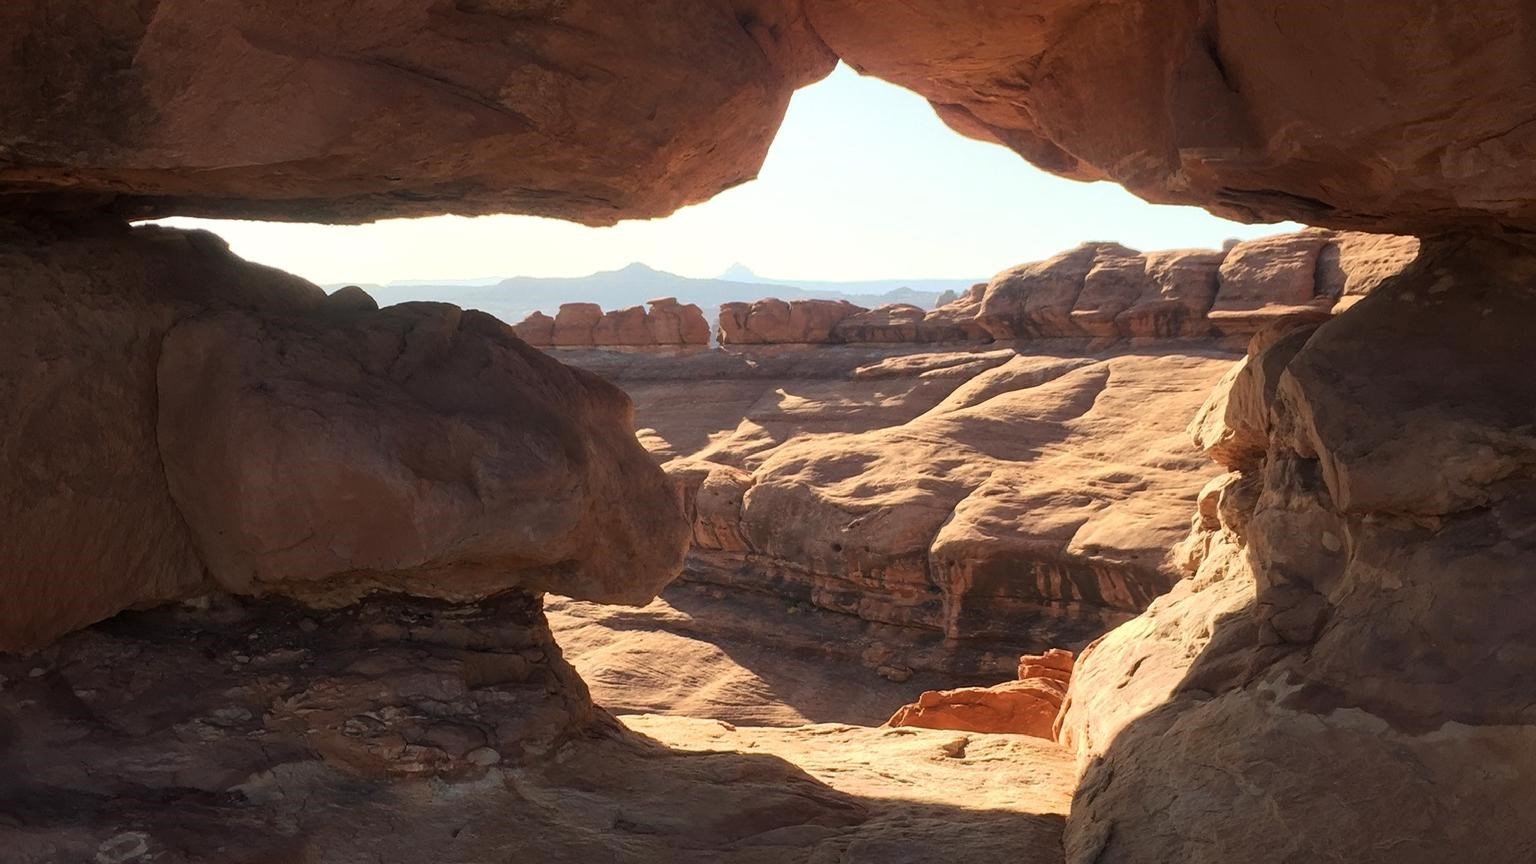 Canyons seen through a small opening along a sandstone wall